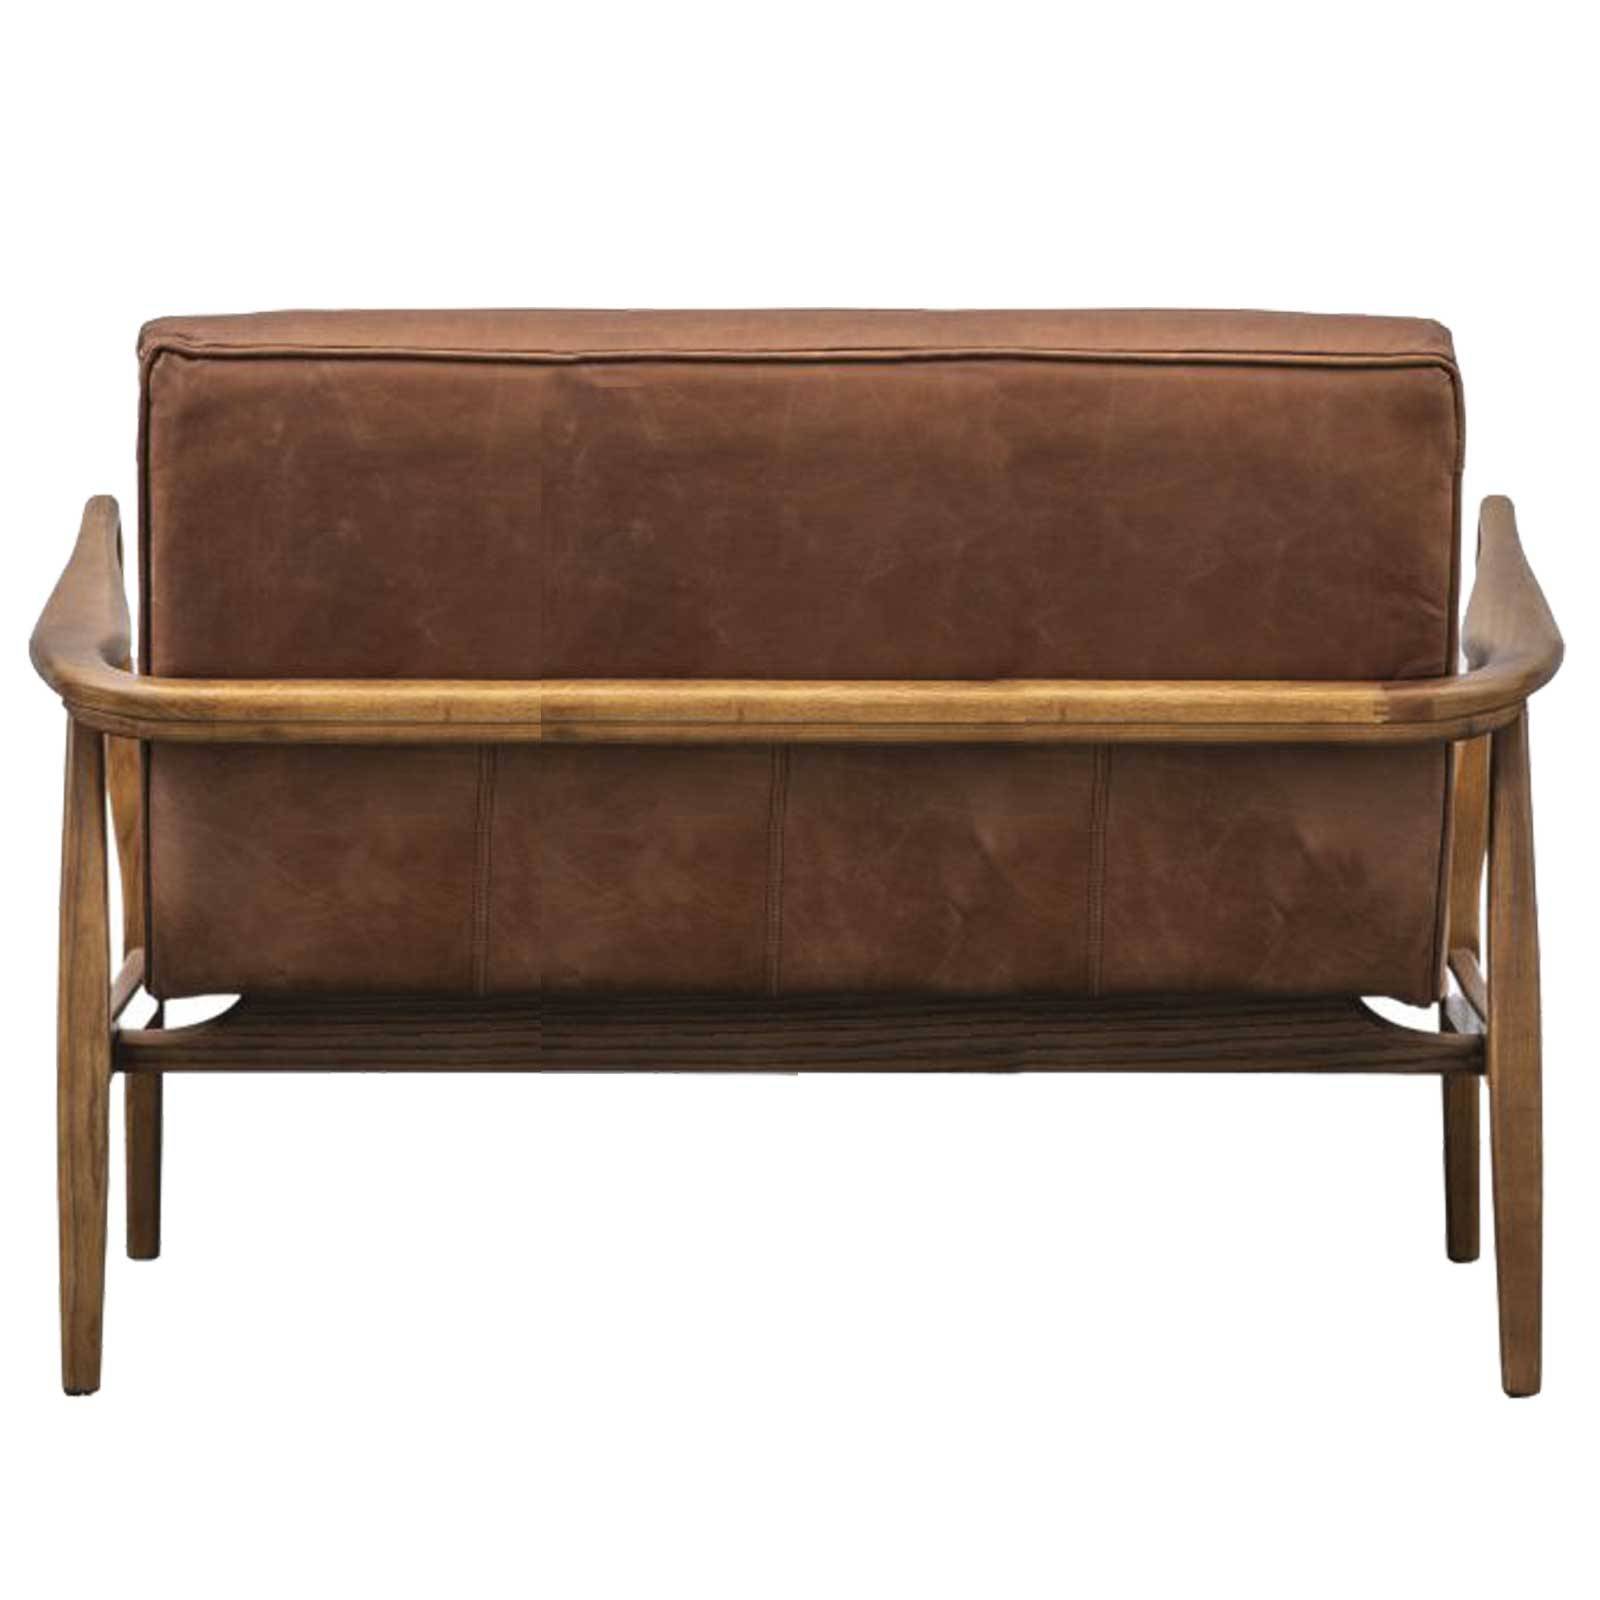 The Auto Oak 2 Seater Sofa in Distressed Brown Leather thumbnails